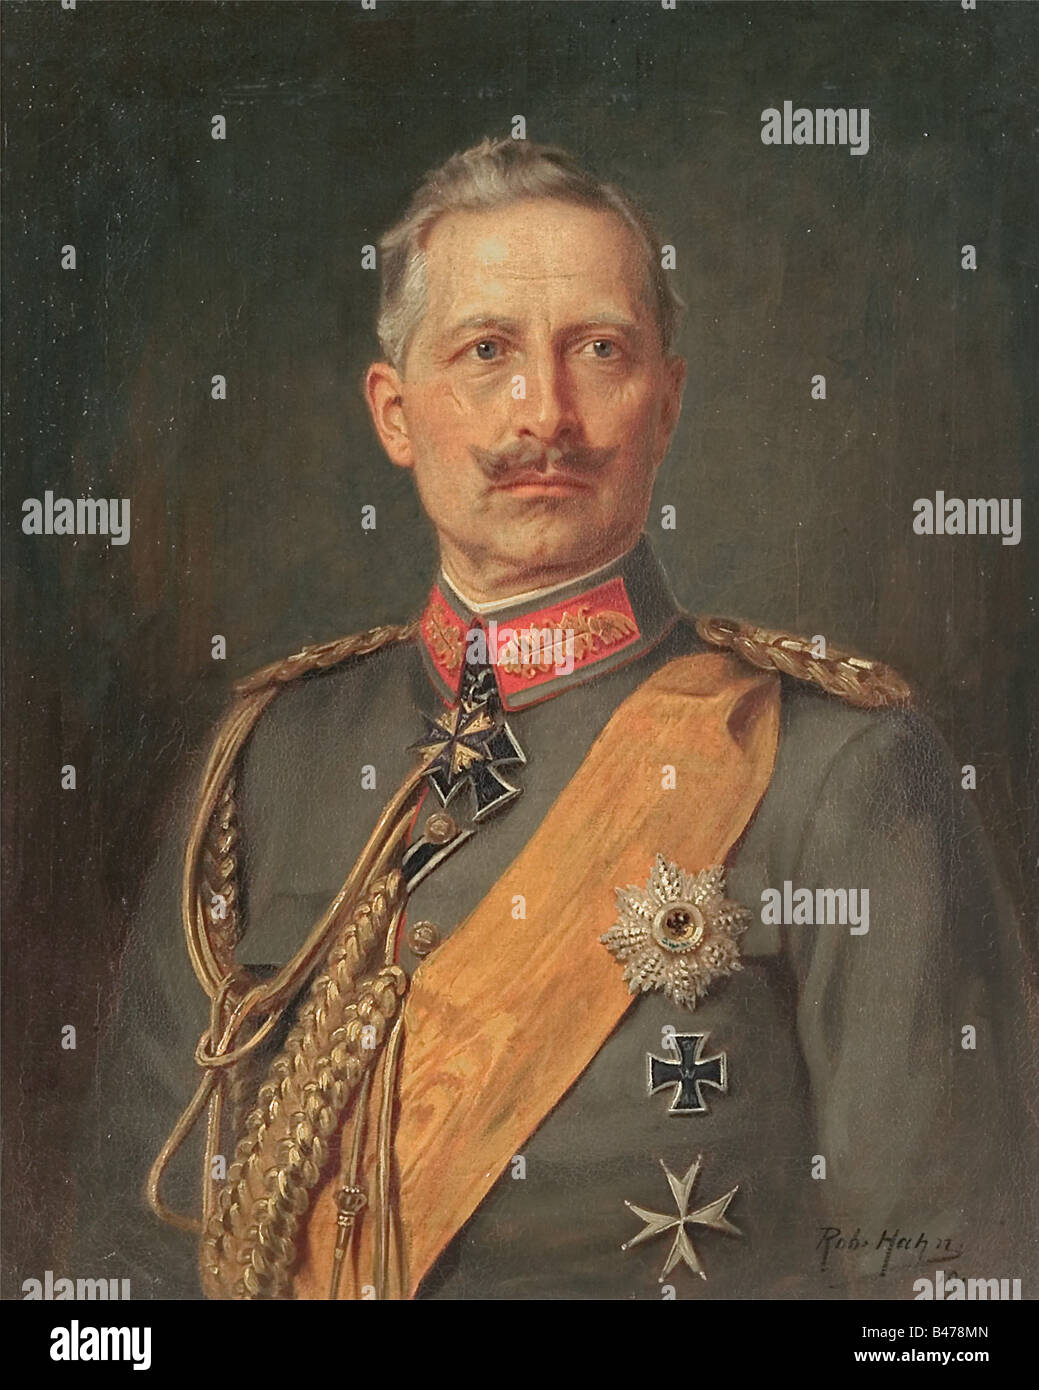 Emperor Wilhelm II, a halfportrait, oil relined on hardboard. Signed, 'Rob. Hahn 19' at the lower right. The emperor is in a field grey general's uniform with decorations. Surface craquelure. In a smooth, gilded, molded frame, with repairs in places. Picture dimensions 65 x 81 cm. Framed dimensions 76 x 92 cm. Robert Hahn (1883 - 1940) was trained in Dresden, where he then worked as an illustrator, and landscape and portrait painter after 1913. See Thieme-Becker, vol. XV, p. 480. fine arts, people, 1910s, 20th century, Prussian, Prussia, German, Germa, Artist's Copyright has not to be cleared Stock Photo